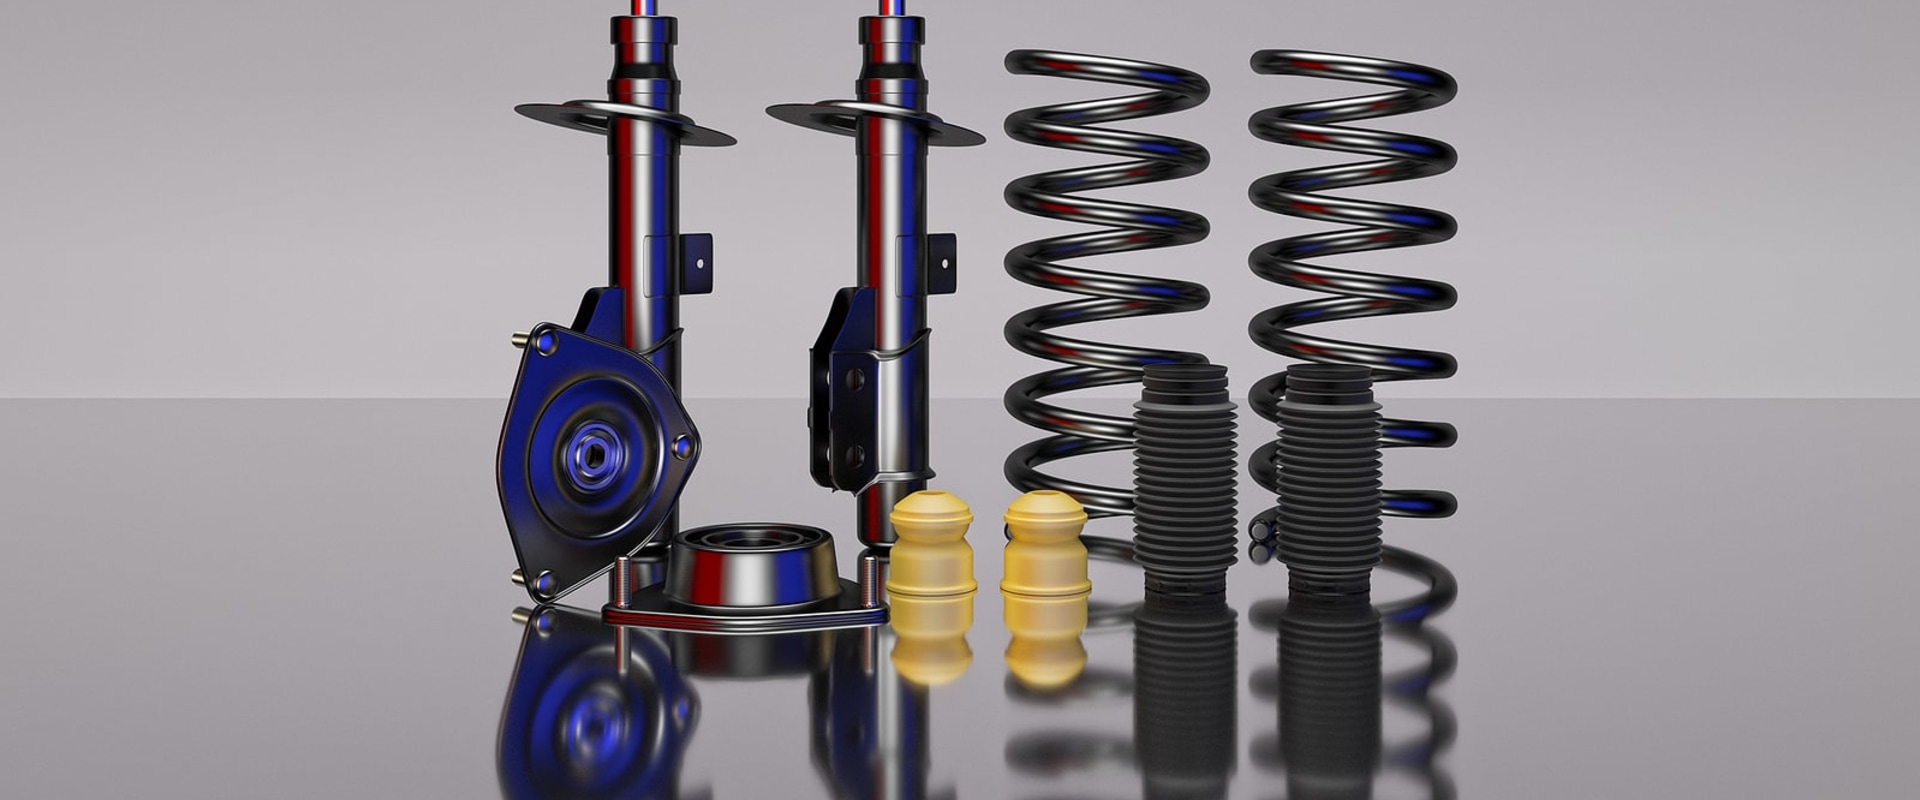 Understanding Shock Absorbers and Their Function in a Vehicle's Suspension